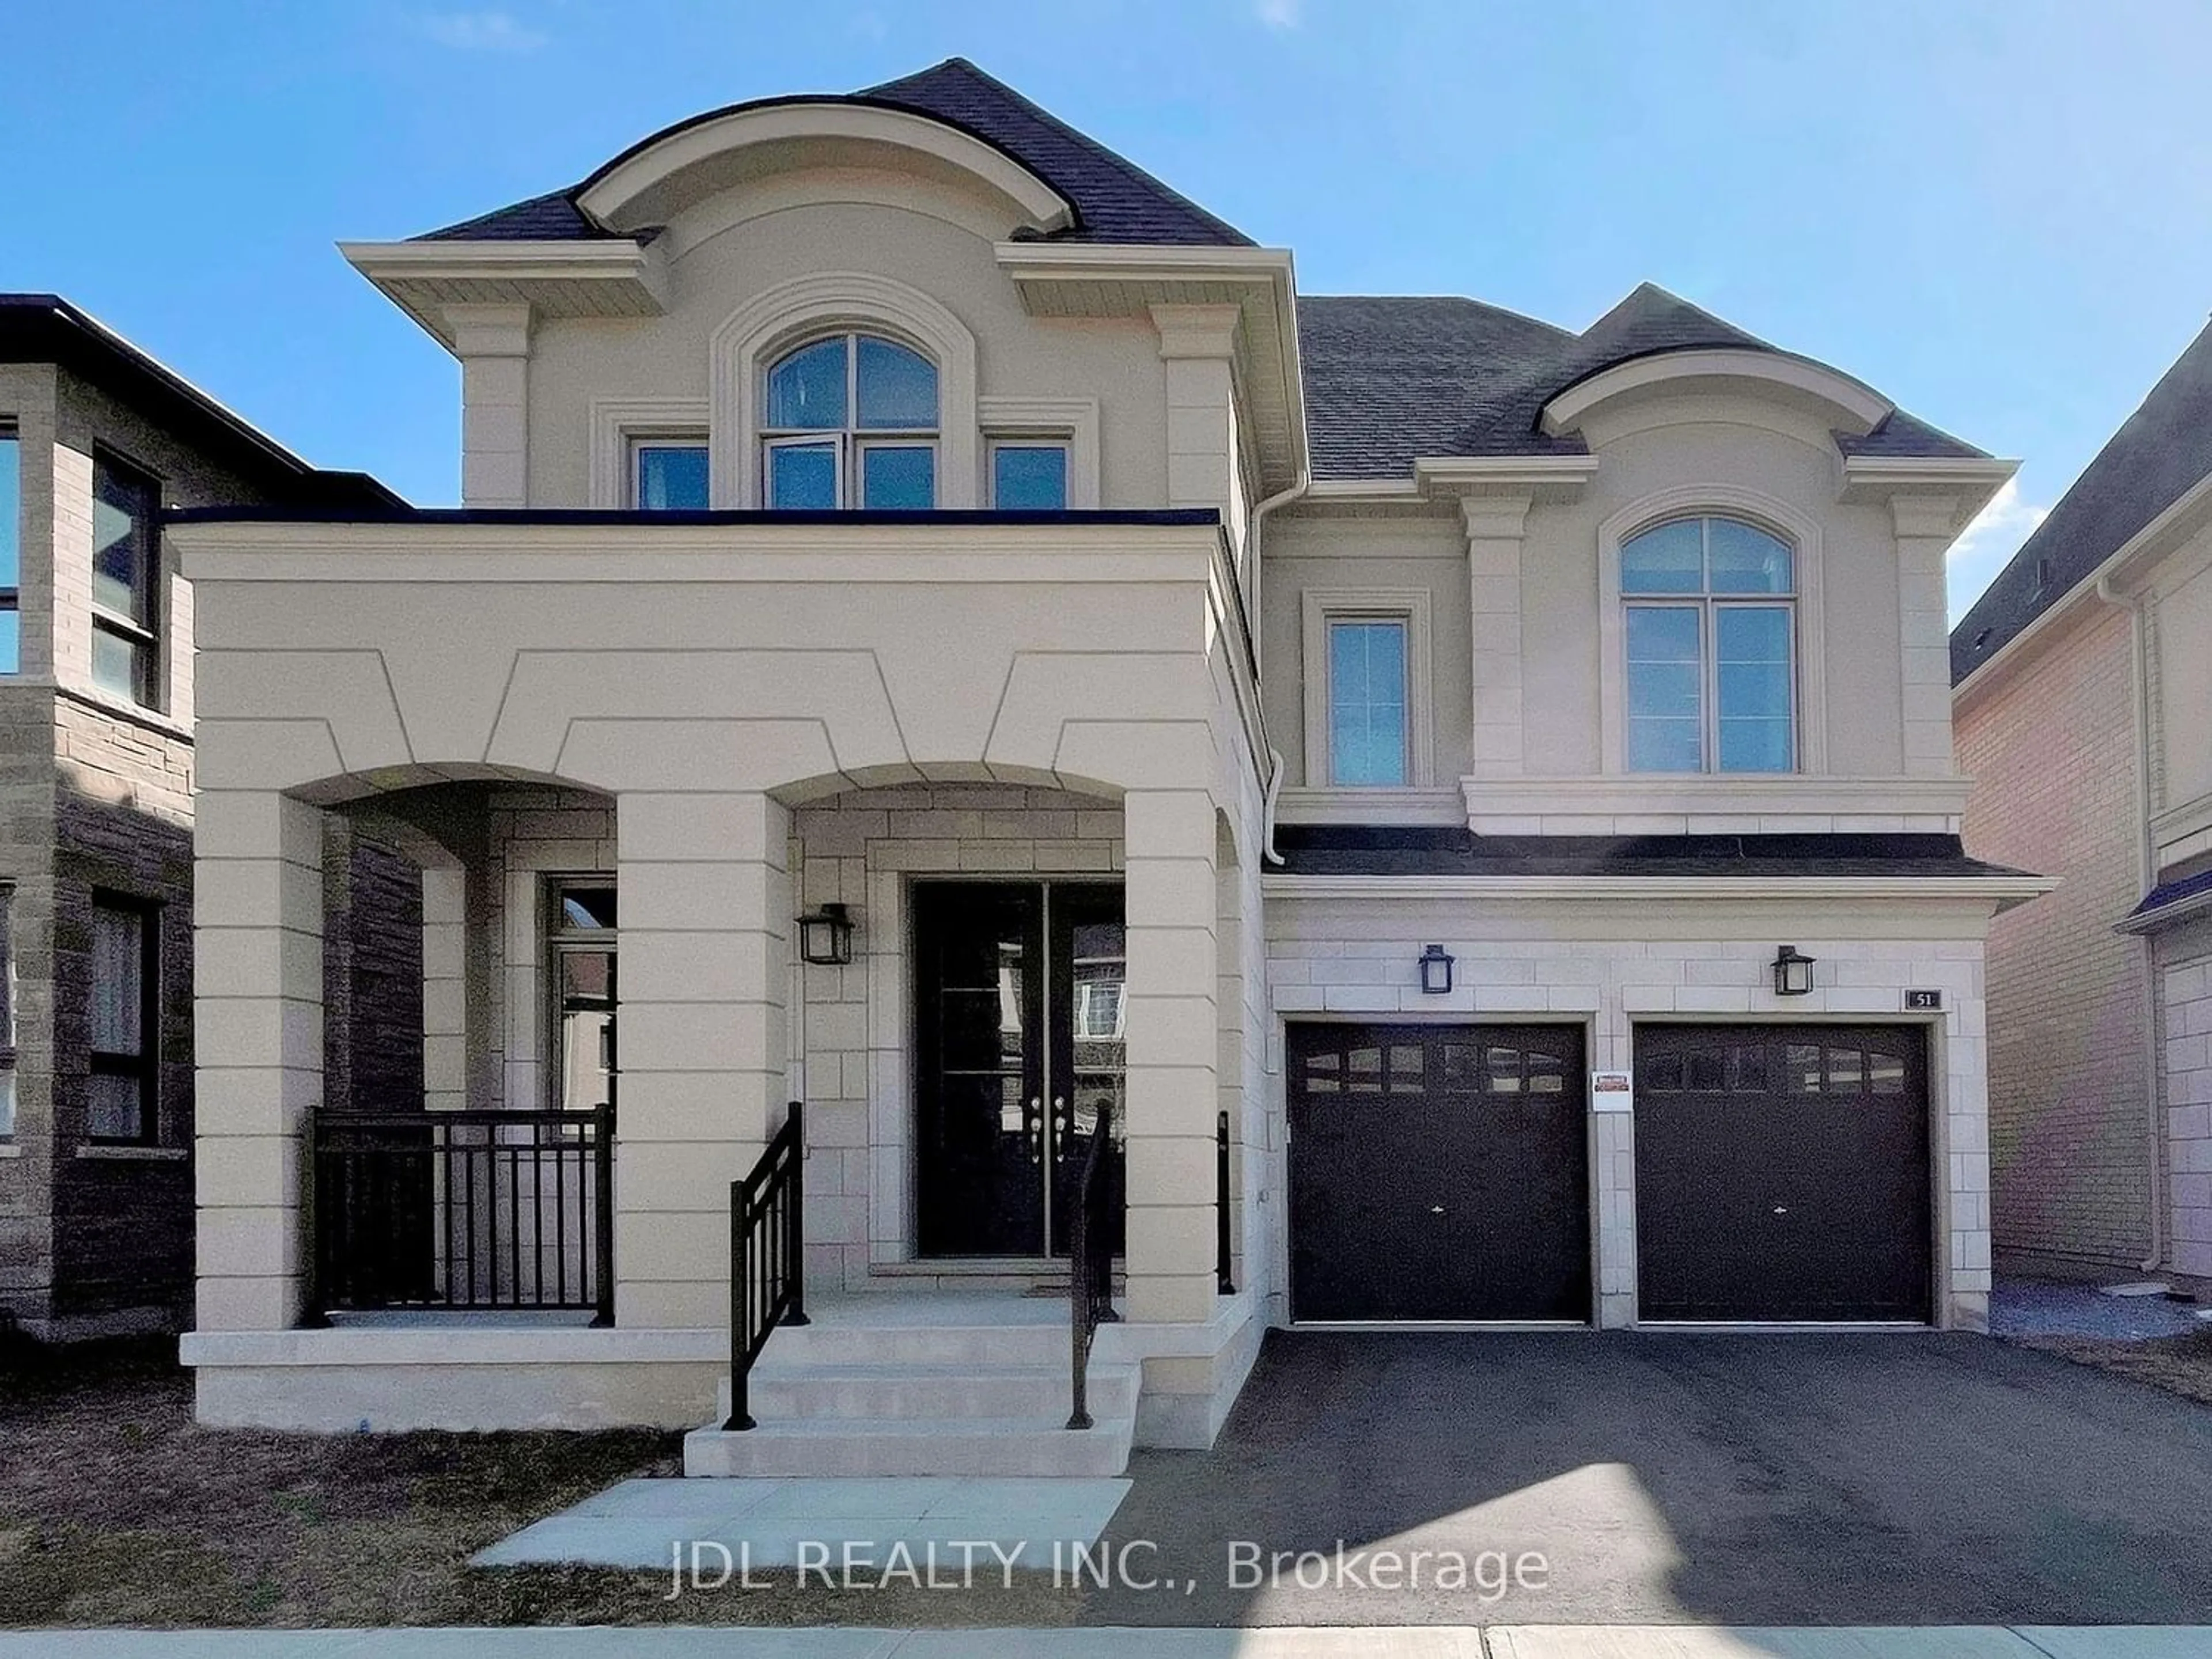 Home with brick exterior material for 51 Red Giant St, Richmond Hill Ontario L4C 4Y4